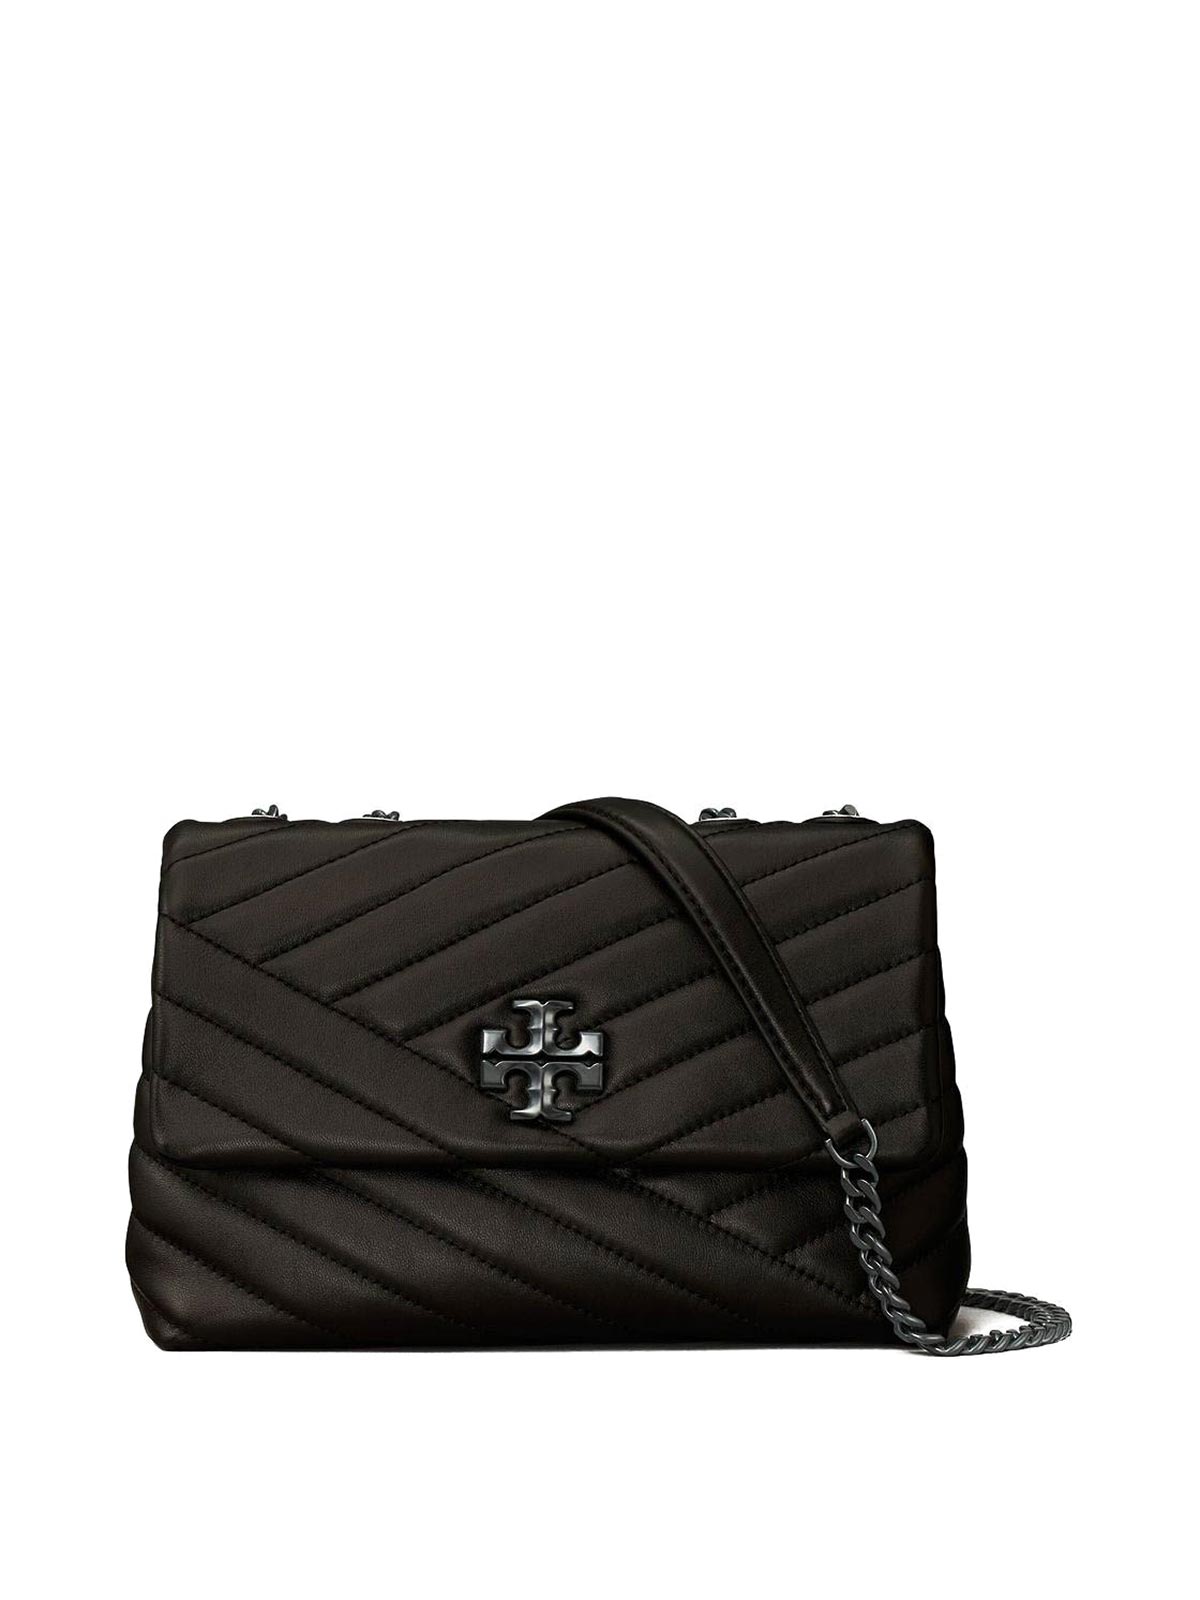 Tory Burch Kira Small Leather Shoulder Bag In Brown